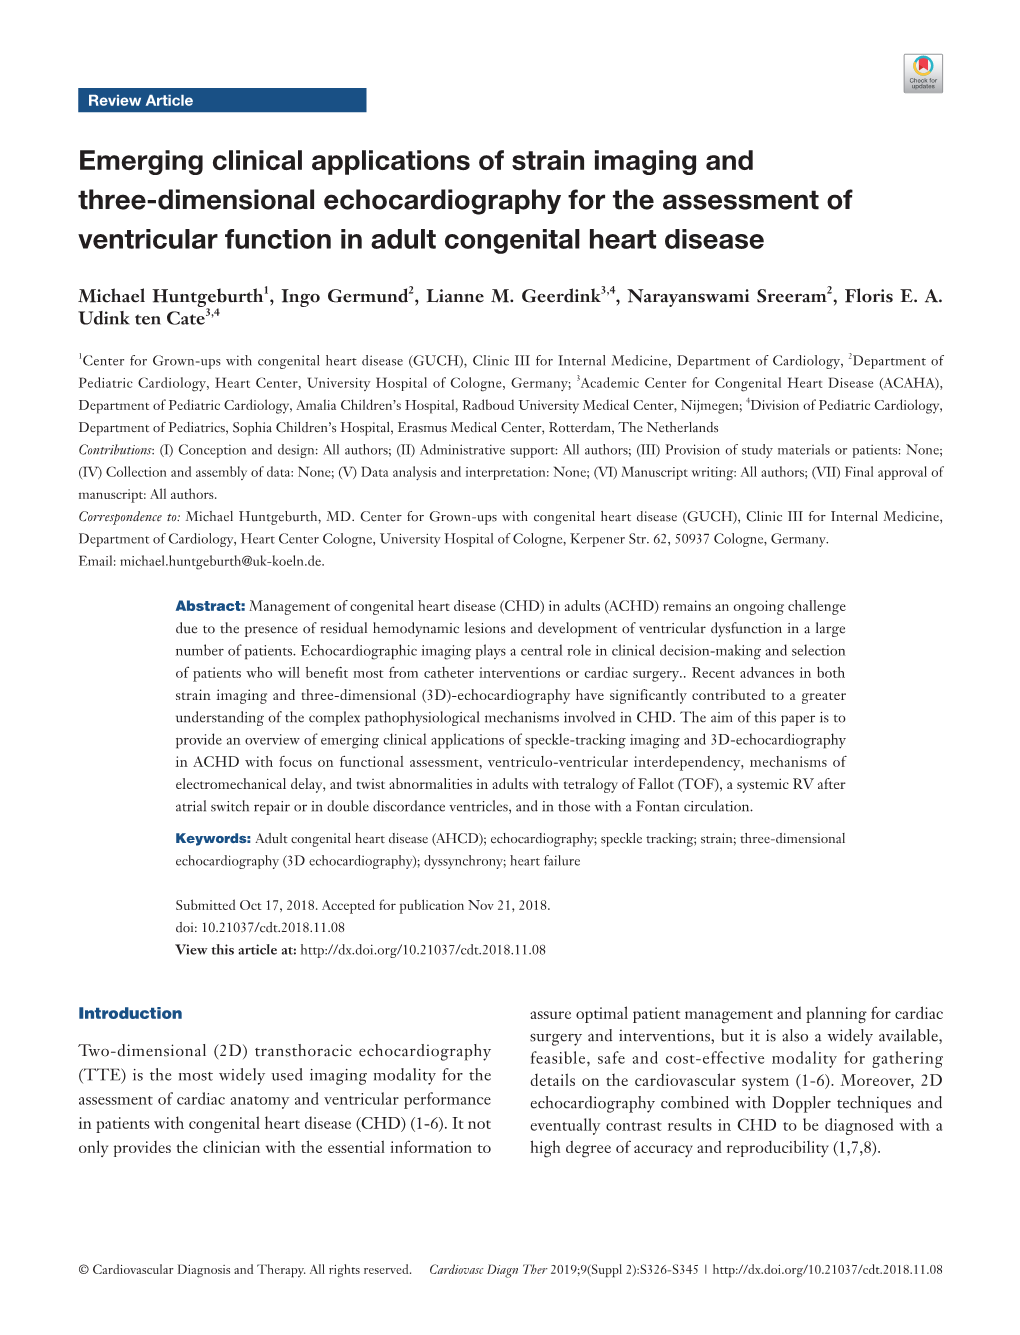 Emerging Clinical Applications of Strain Imaging and Three-Dimensional Echocardiography for the Assessment of Ventricular Function in Adult Congenital Heart Disease